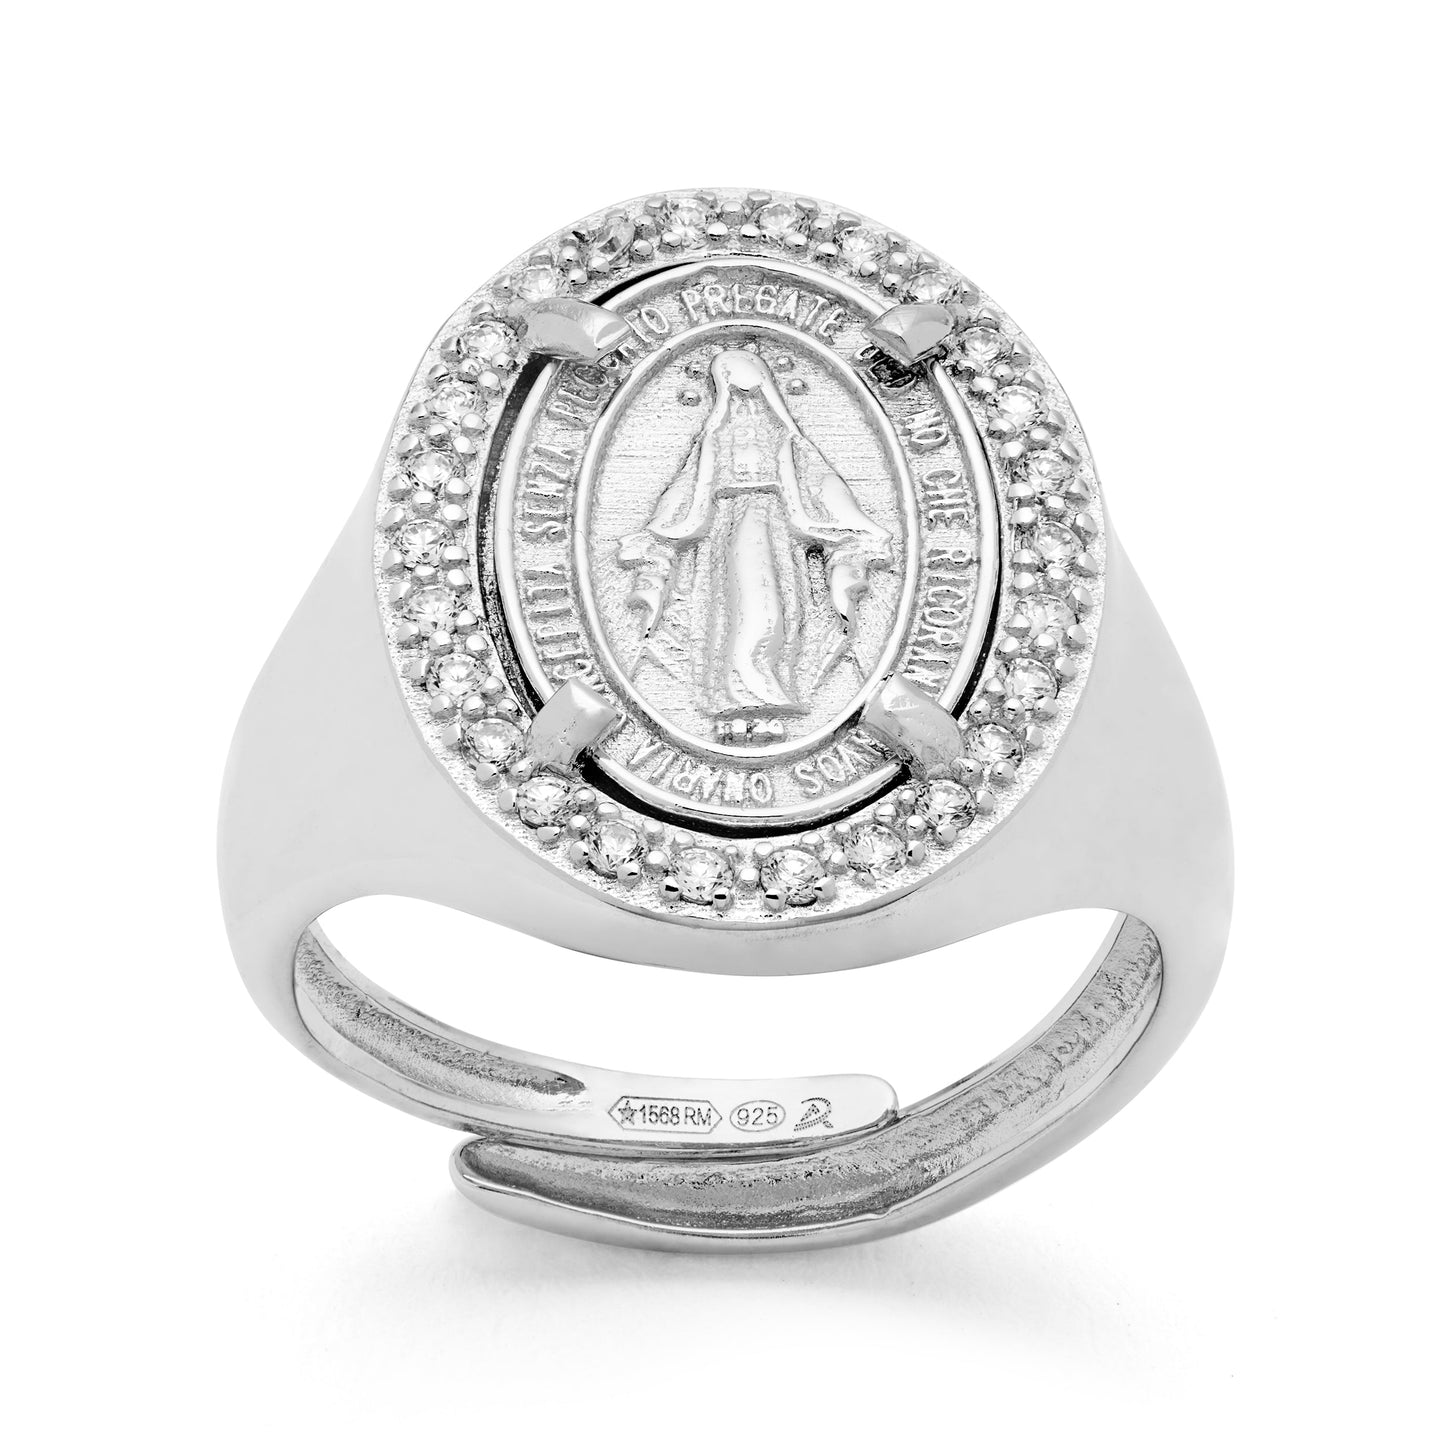 MONDO CATTOLICO Sterling Silver Miraculous Virgin Ring